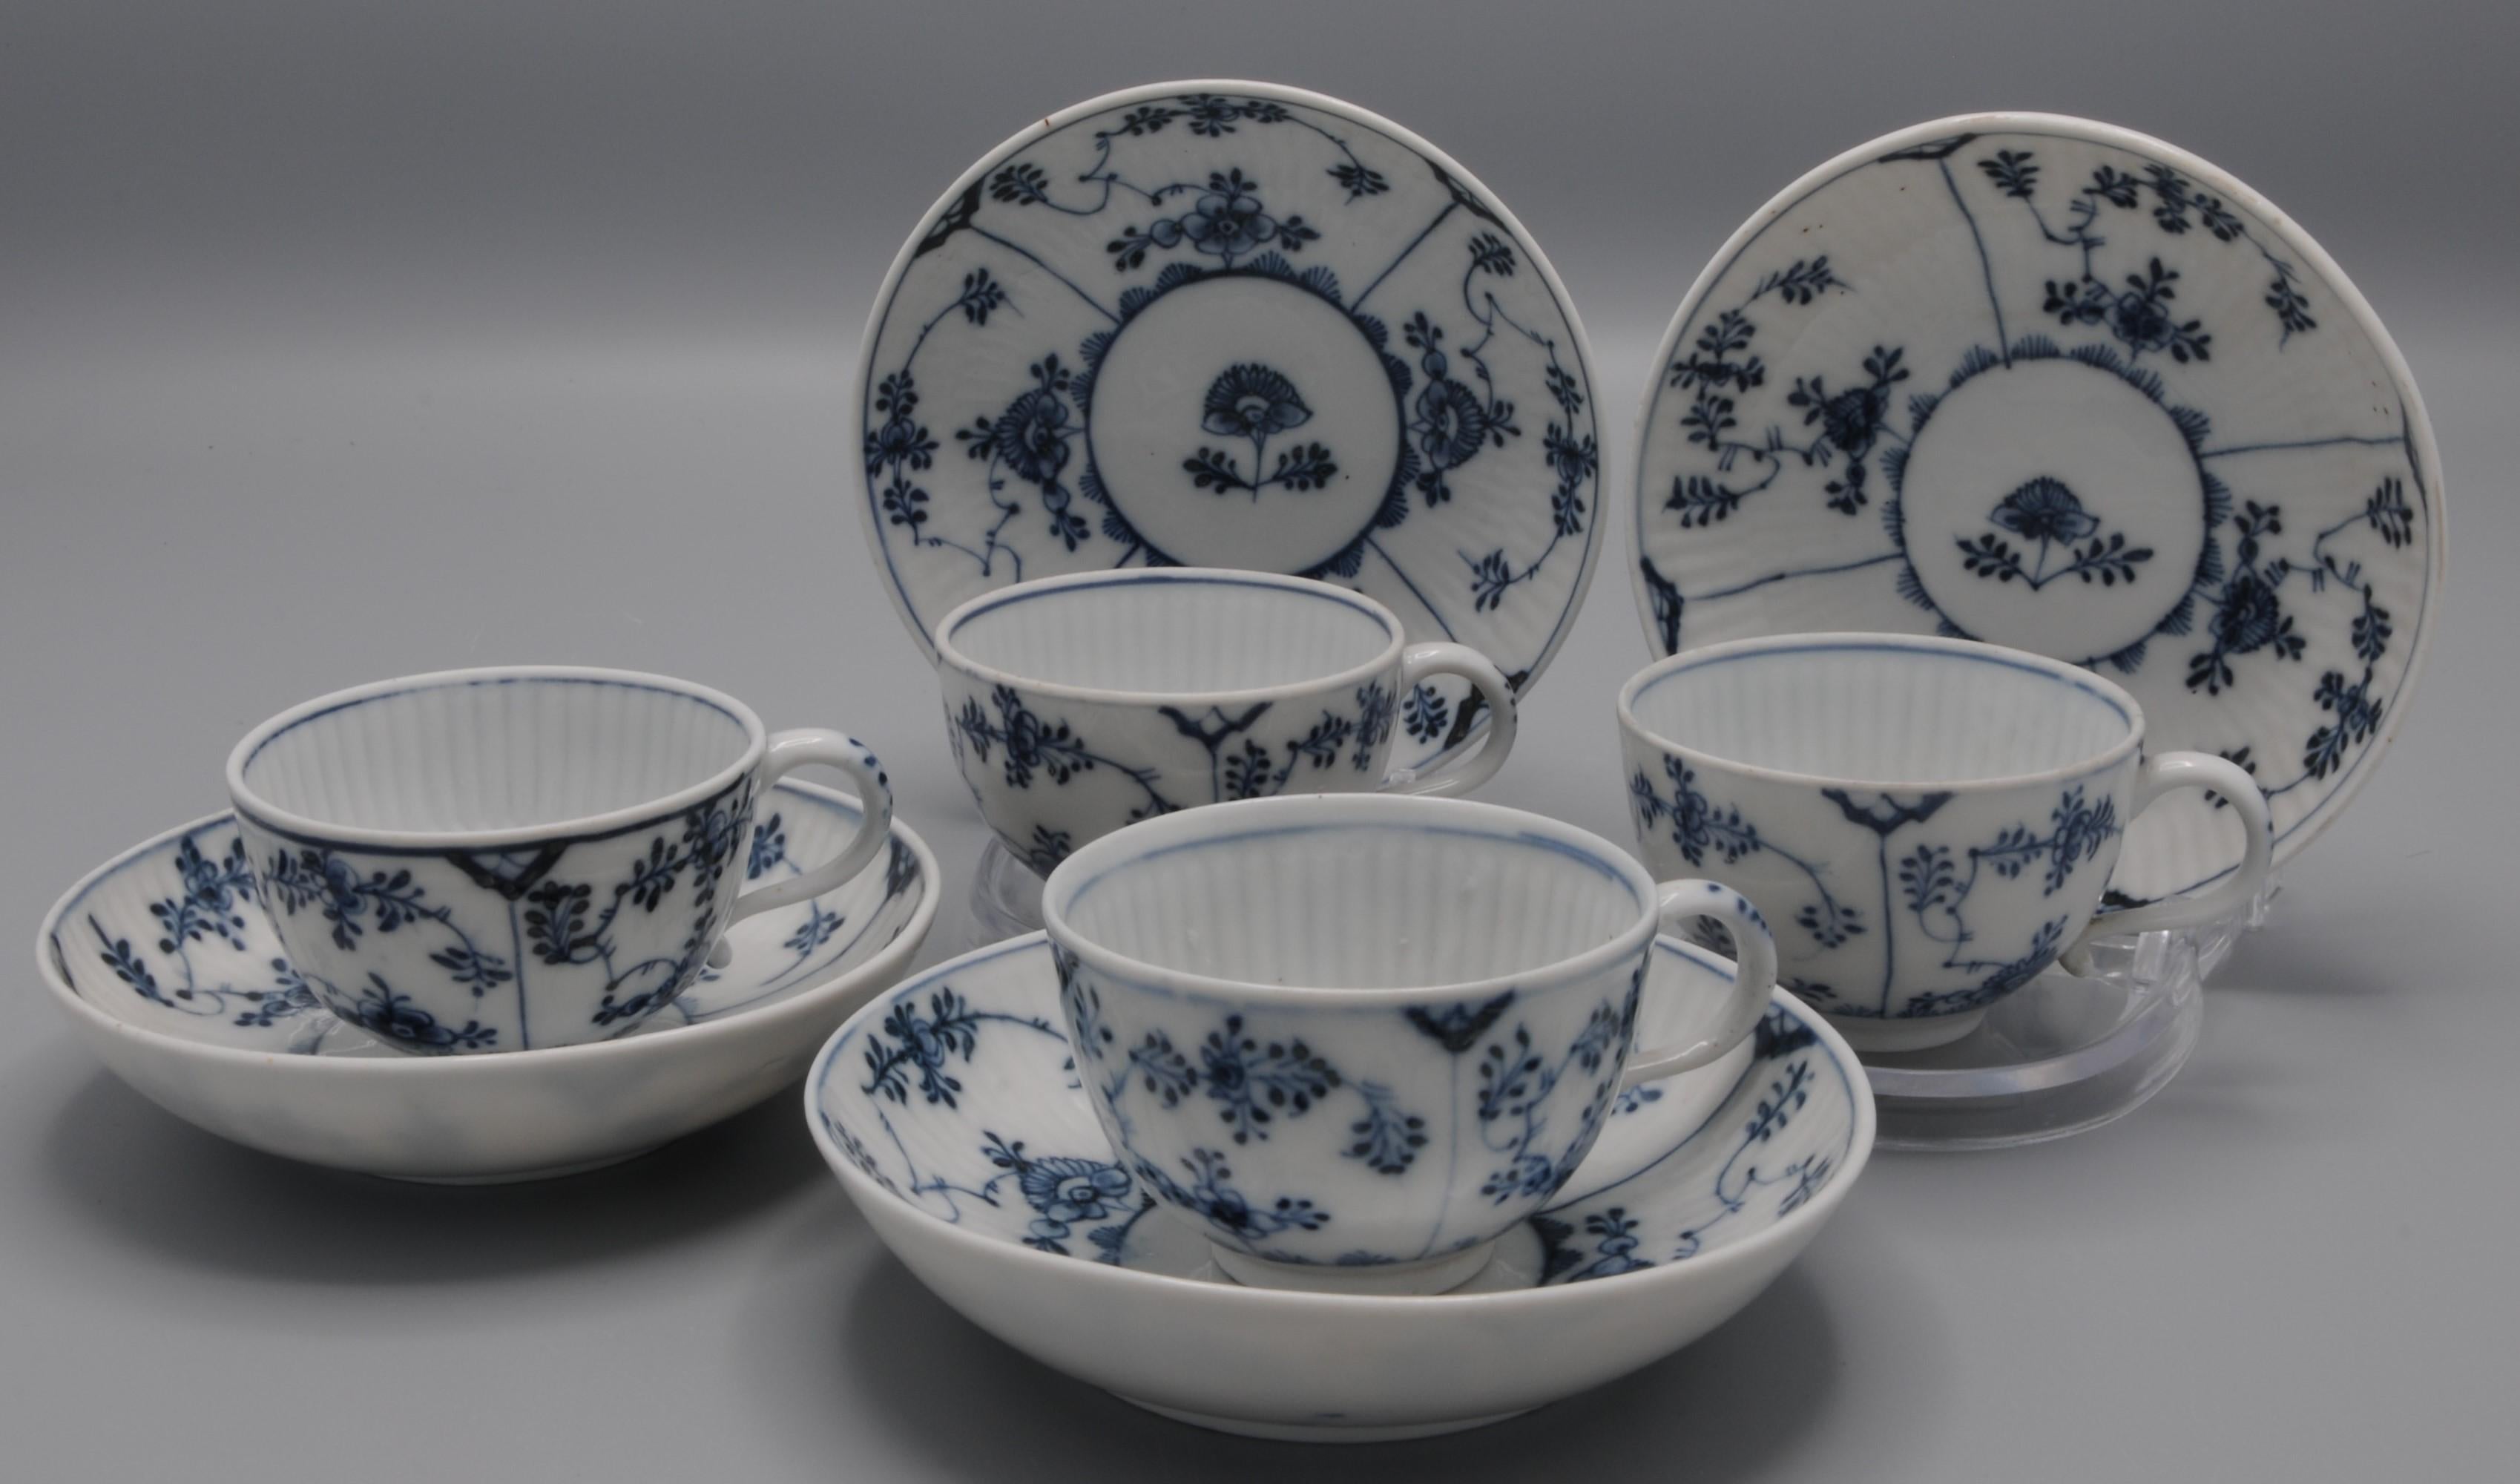 German Meissen - 4 cups and saucers 'Strohblumenmuster', Marcolini period 1774-1814 For Sale